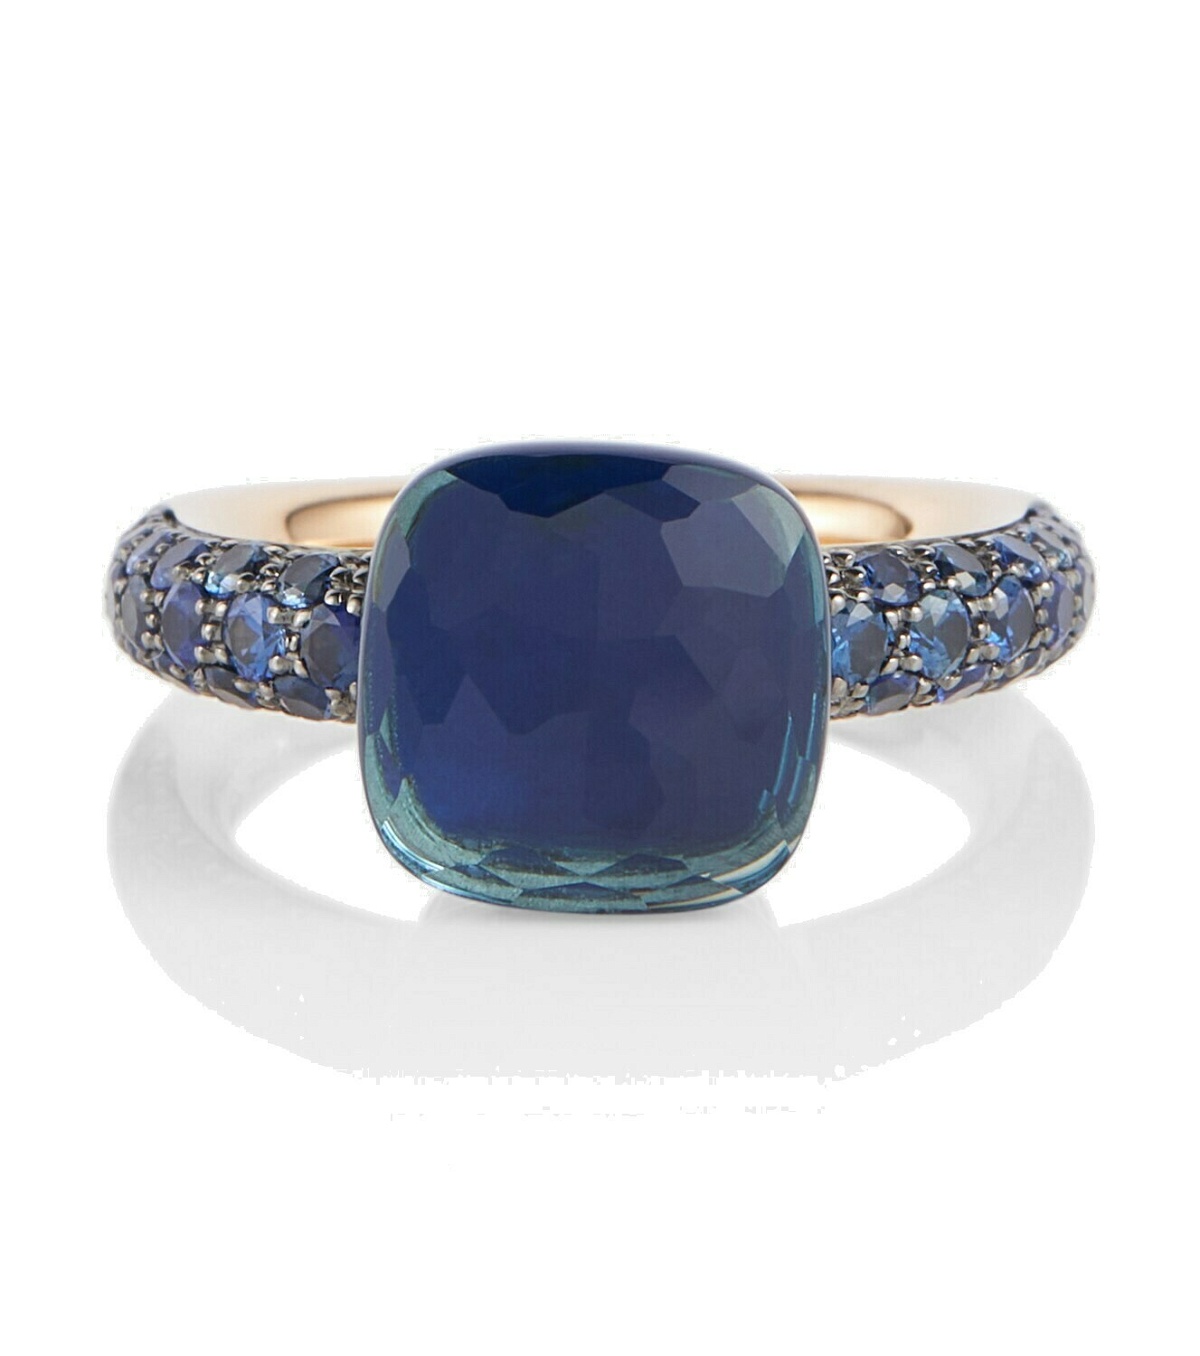 Photo: Pomellato Nudo 18kt rose and white gold ring with London blue topaz